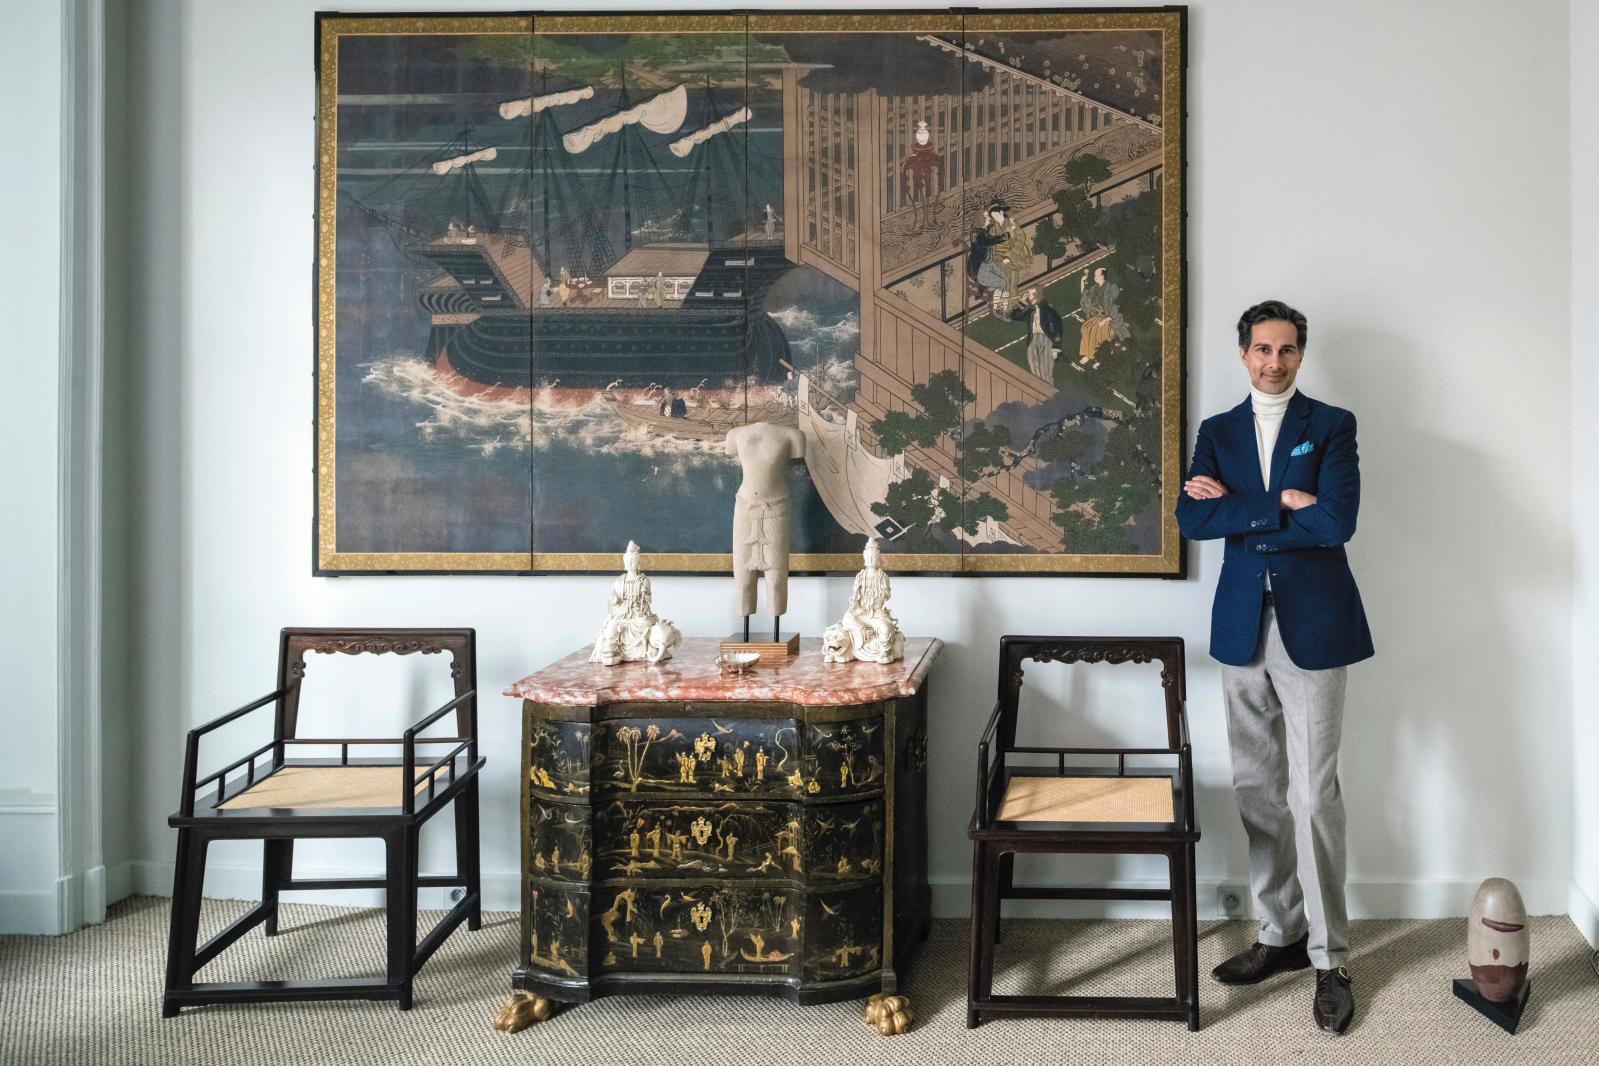 Amin Jaffer: Curator of the Al Thani Collection